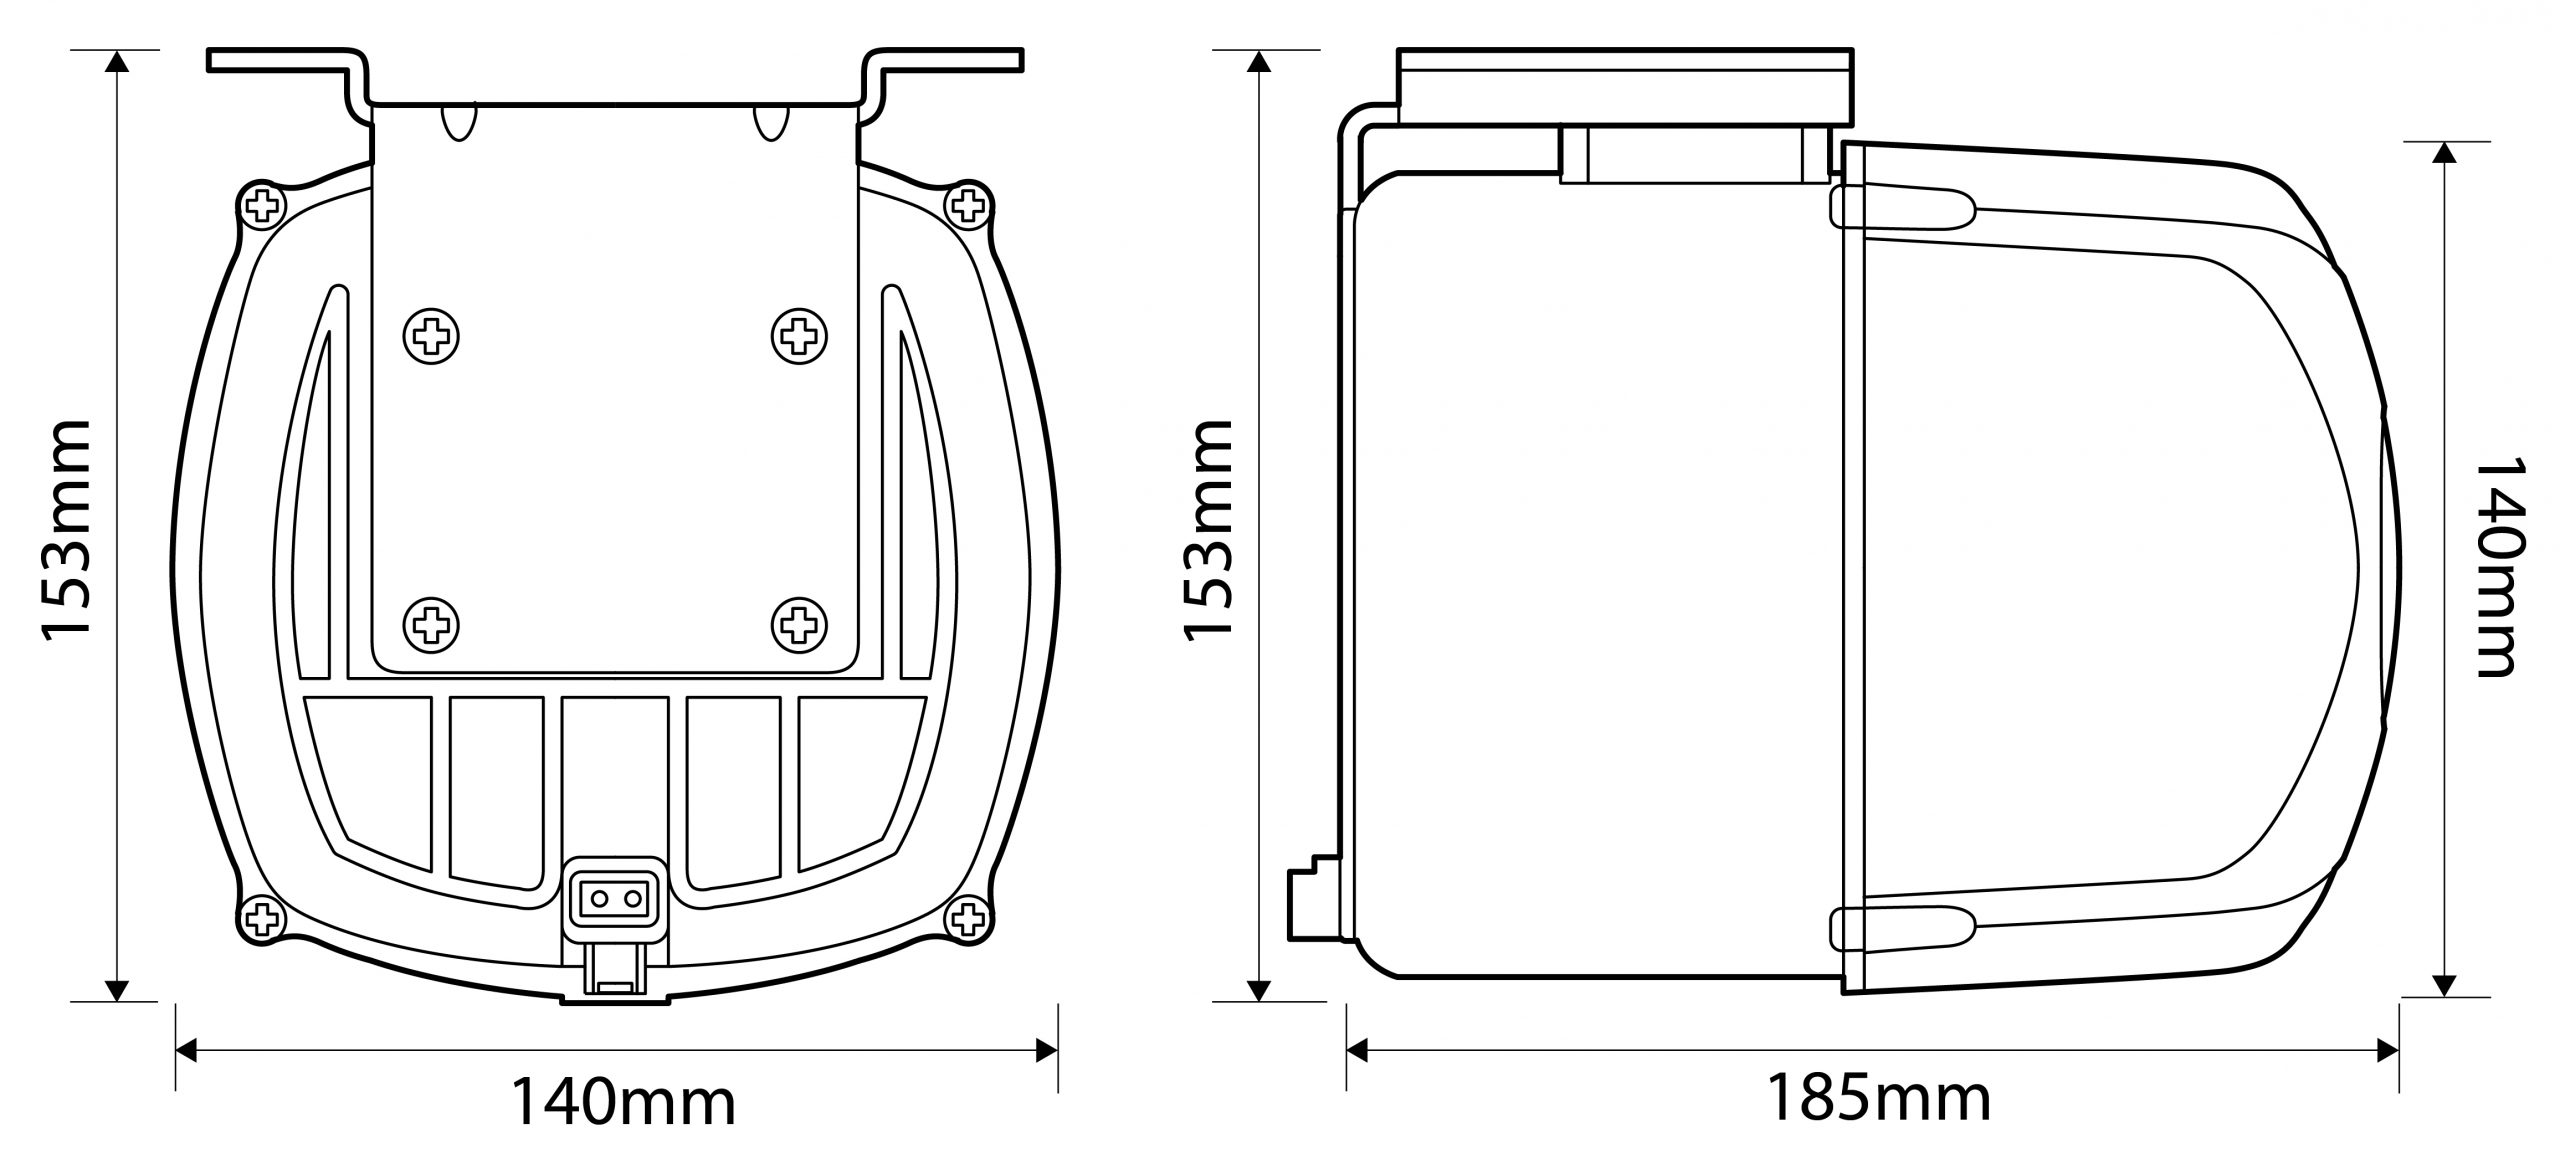 LSP-108 100 Watt Low Frequency Rumble Speaker - Digital Dimensions Illustration Showing 140mm Width, 153mm Height and 185mm Depth